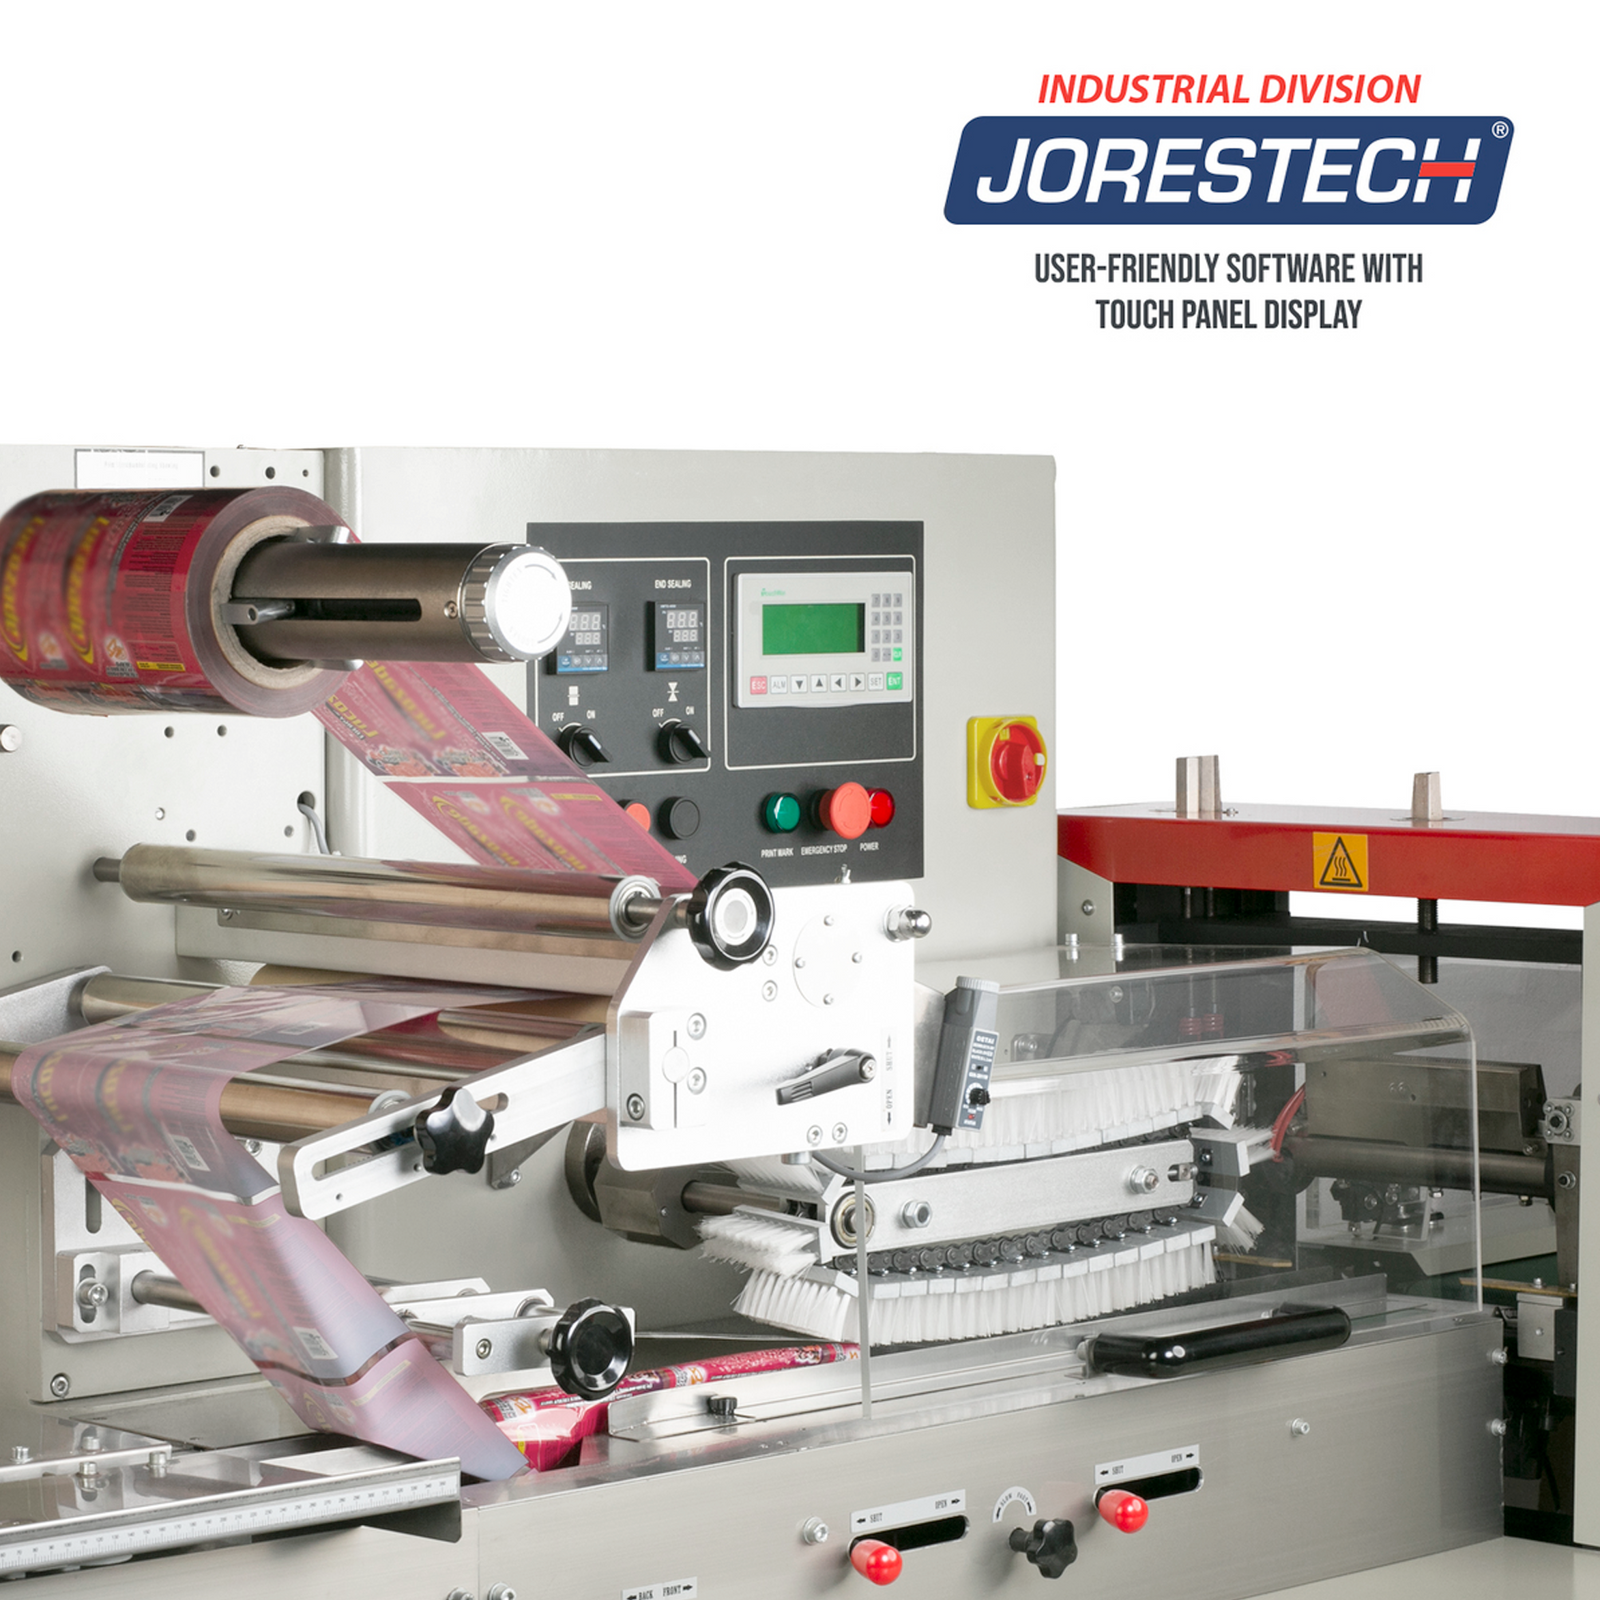 The packaging and sealing area on an automatic HFFS flow pack system. The film roll holder is equipped with a red packaging film roll threaded through the machine and ready for use.  Jorestech industrial logo is shown and a statement that reads User friendly software with touch panel display